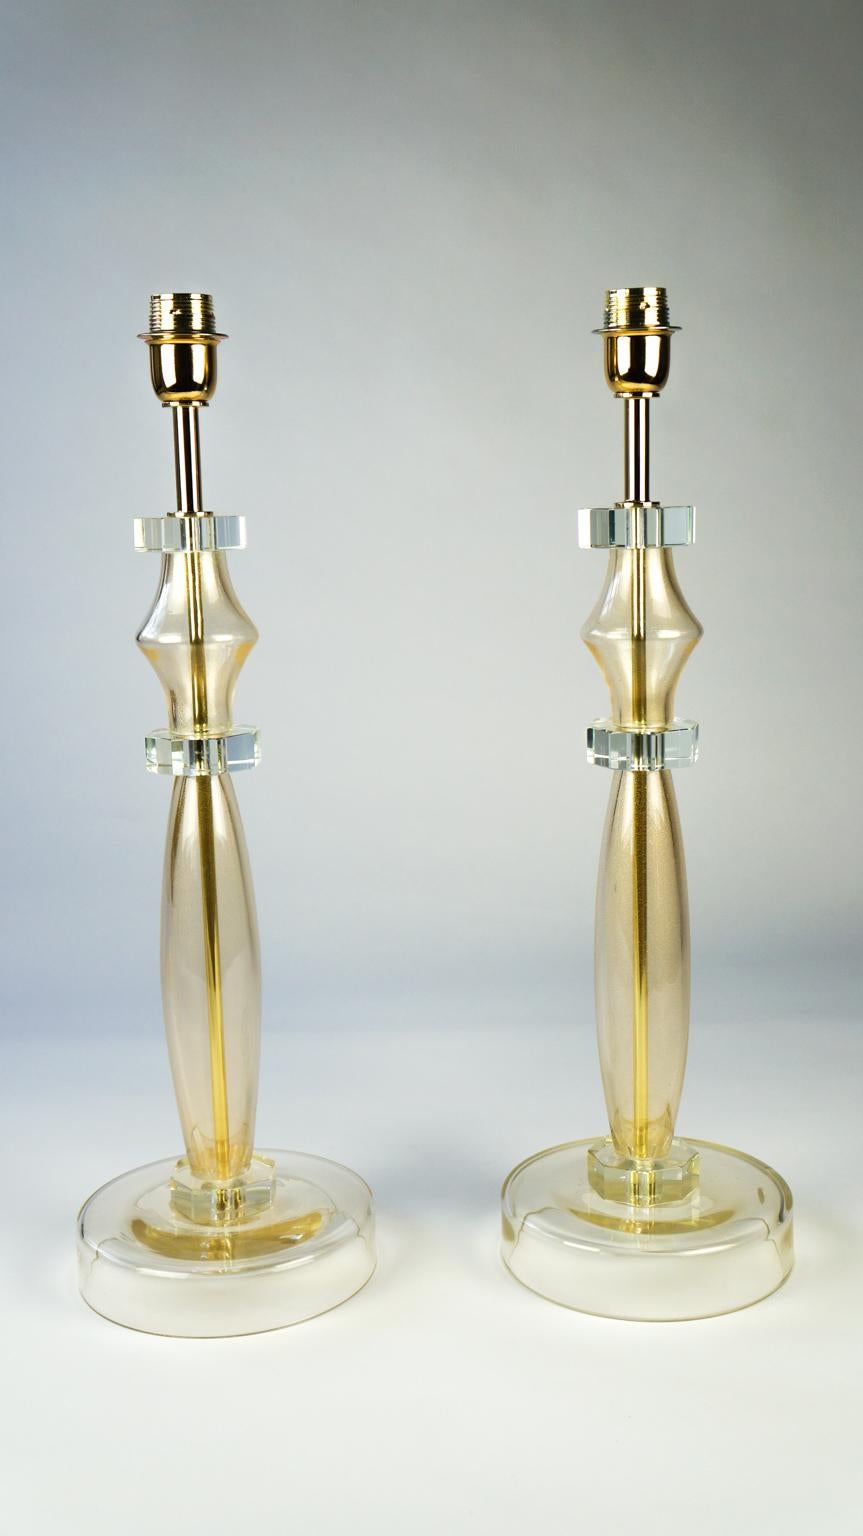 Donà Furnace Mid-Century Modern Gold Leaf Two of Murano Glass Table Lamps, 1978 For Sale 6